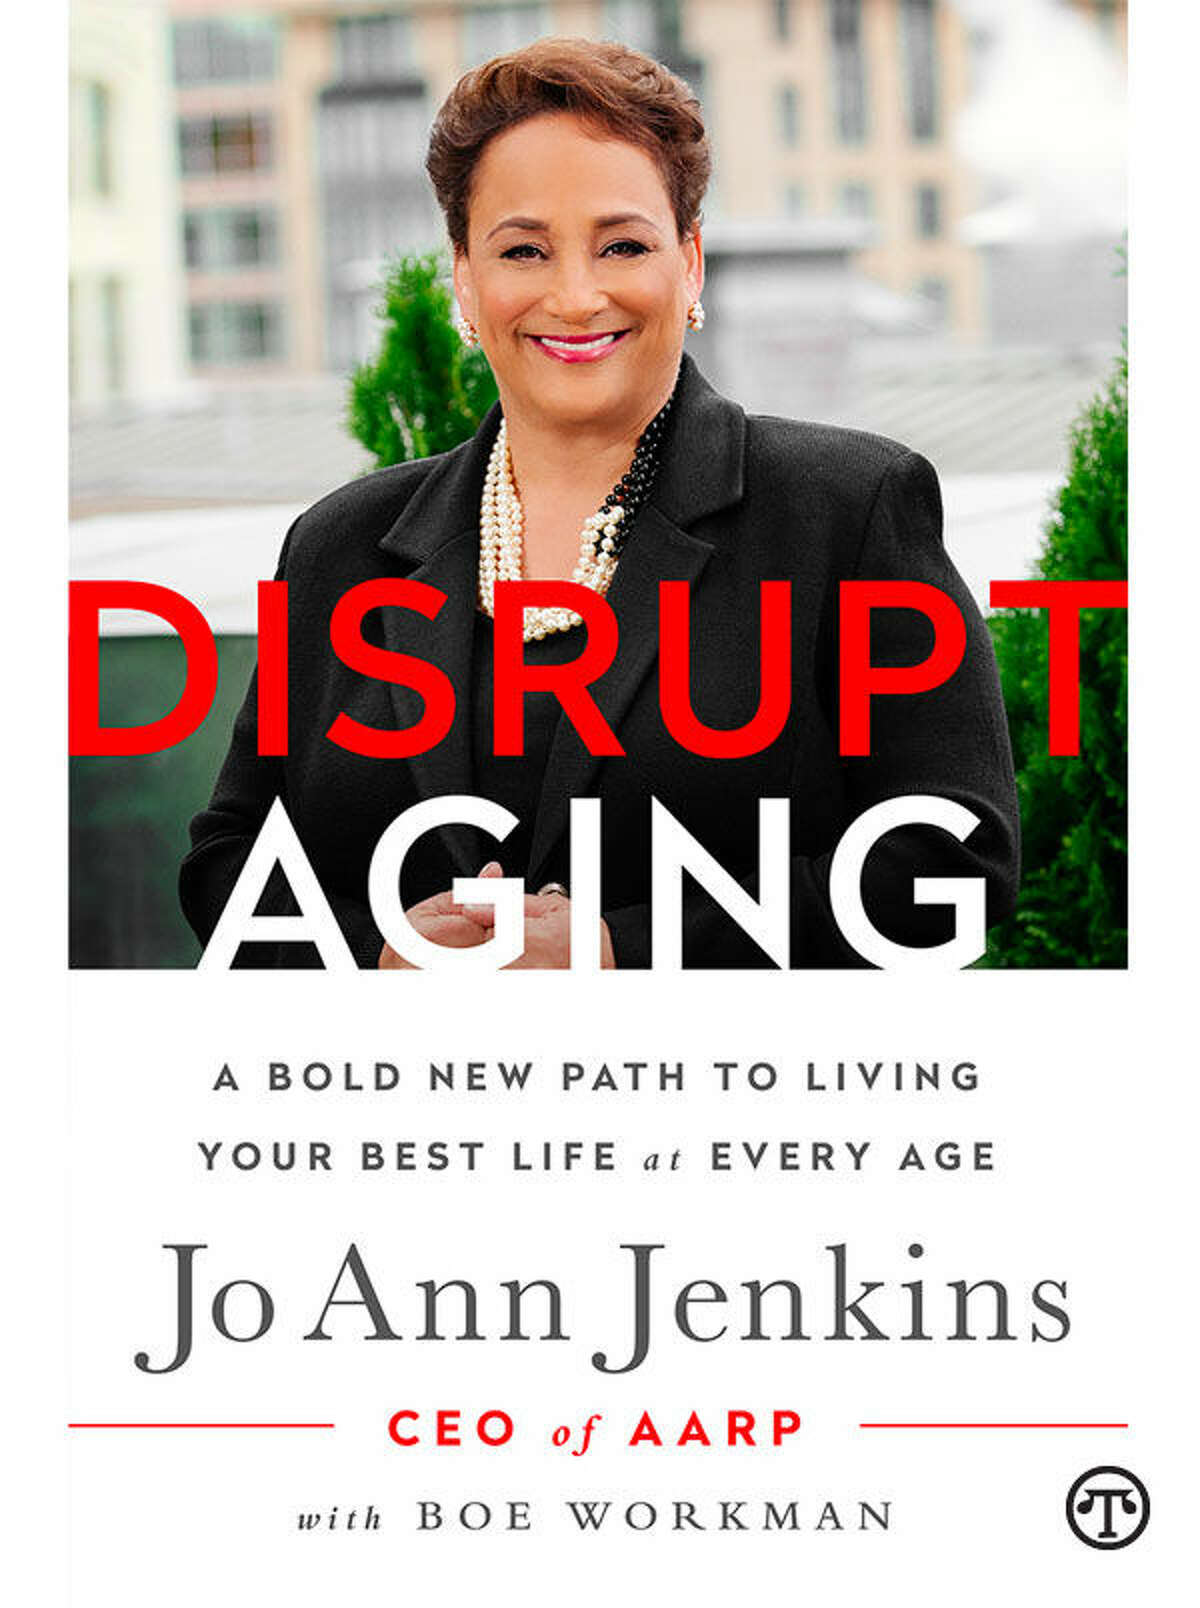 A new book by Jo Ann Jenkins explores the realities of aging in modern times. (NAPS)